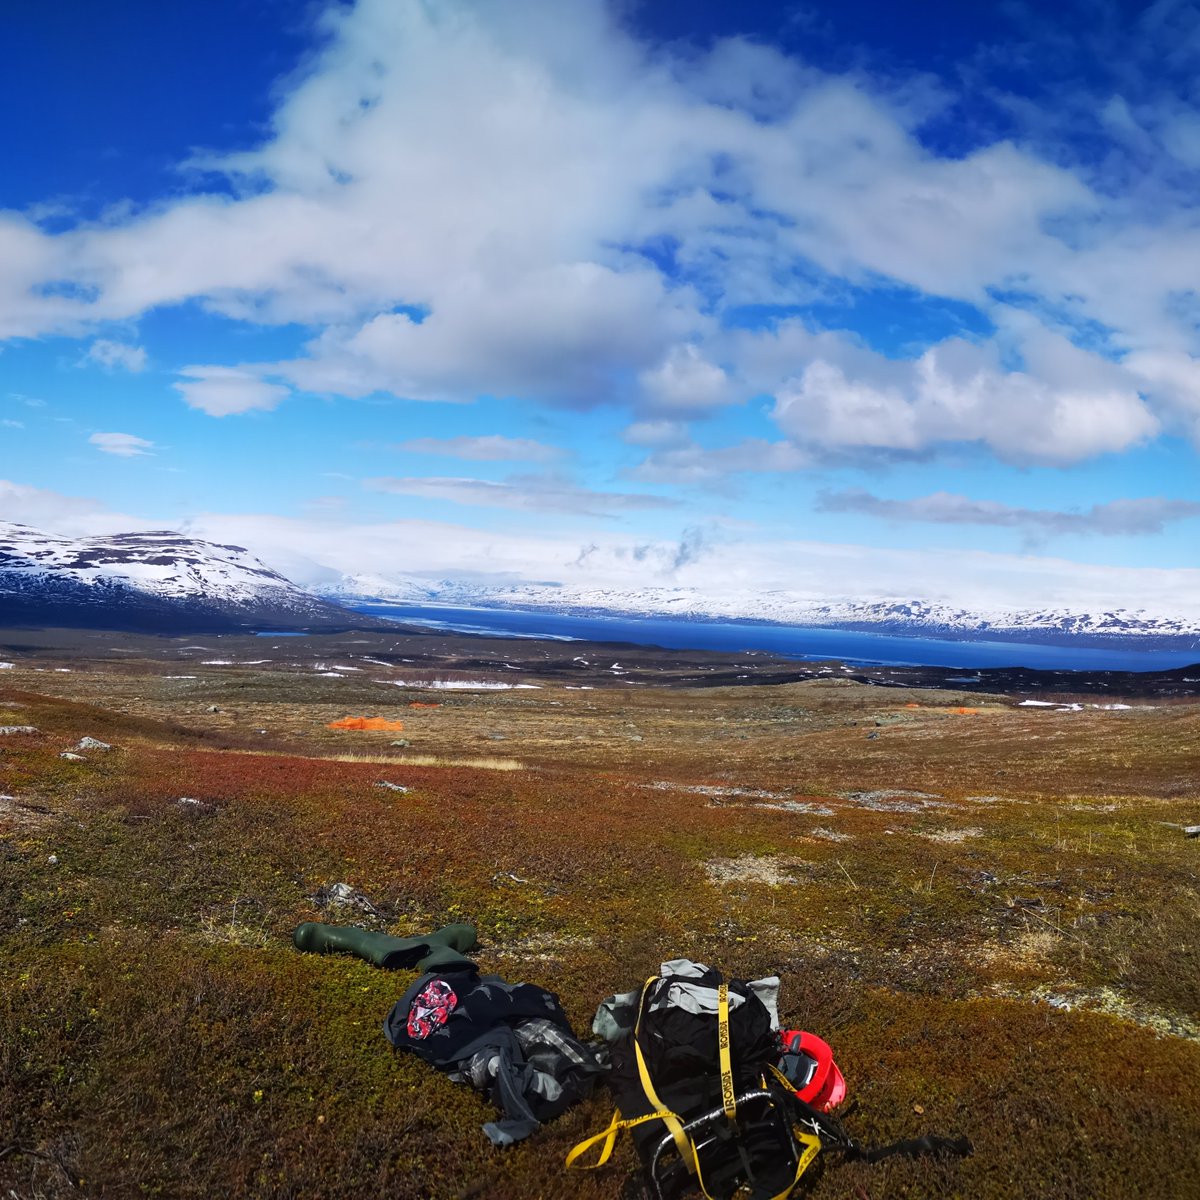 #PhDopportunity  Alert📢! We offer a 4 year, fully-funded🙂 #PhD in #remotesensing. We will use #hyperspectral data from #UAV's🚁 to investigate #vegetation 🌱, #ecosystem properties and #landuse changes in the #Arctic. Located @UmeaUniversity in Sweden -> tinyurl.com/ArcticUAVphd